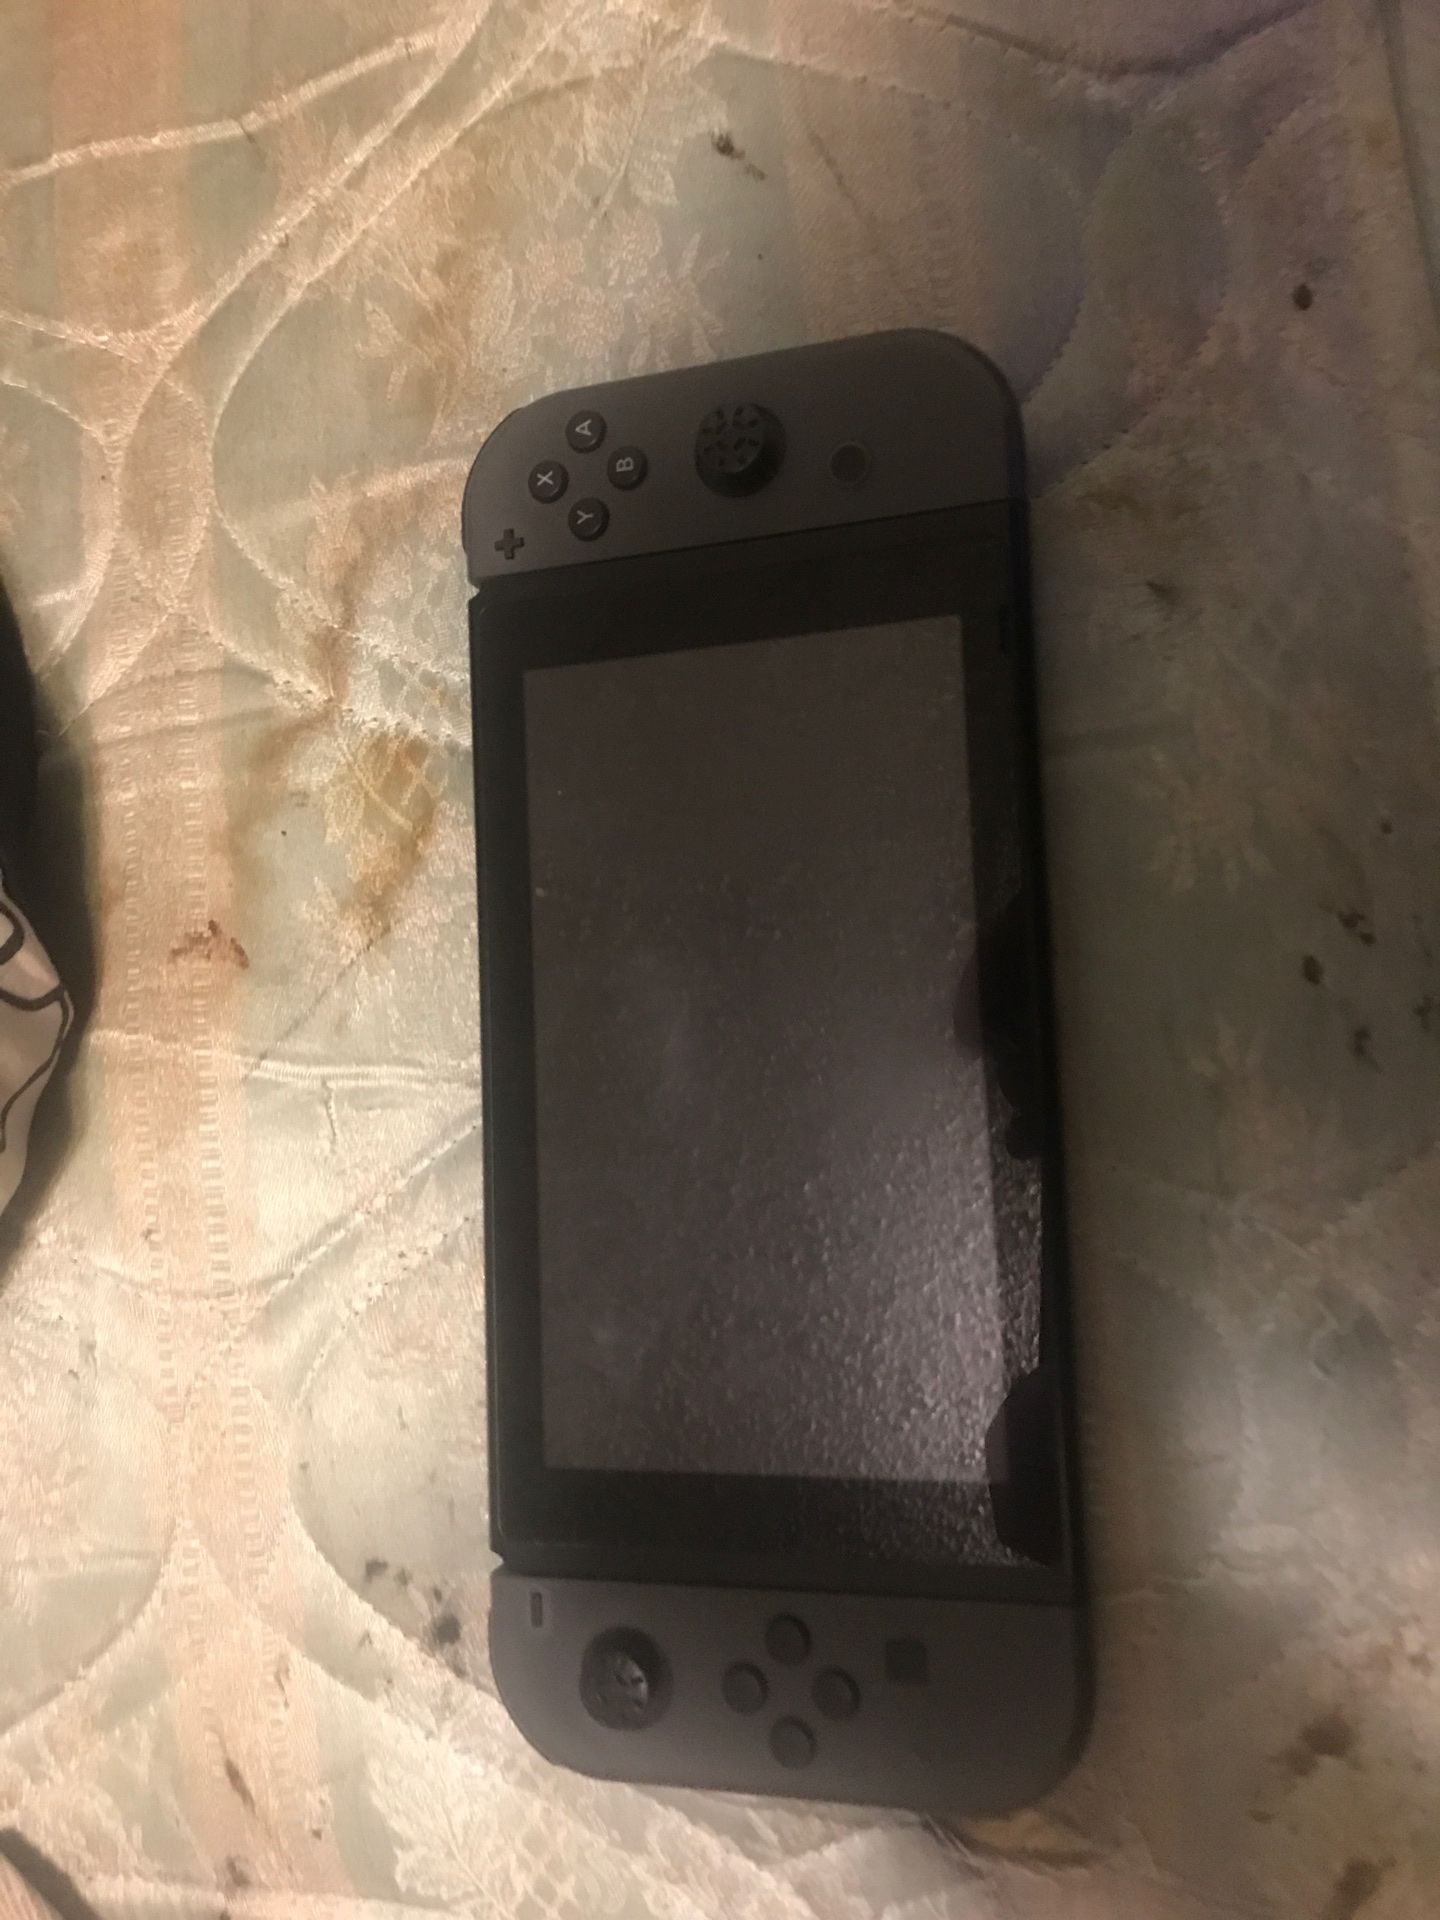 Nintendo switch comes with only what you see